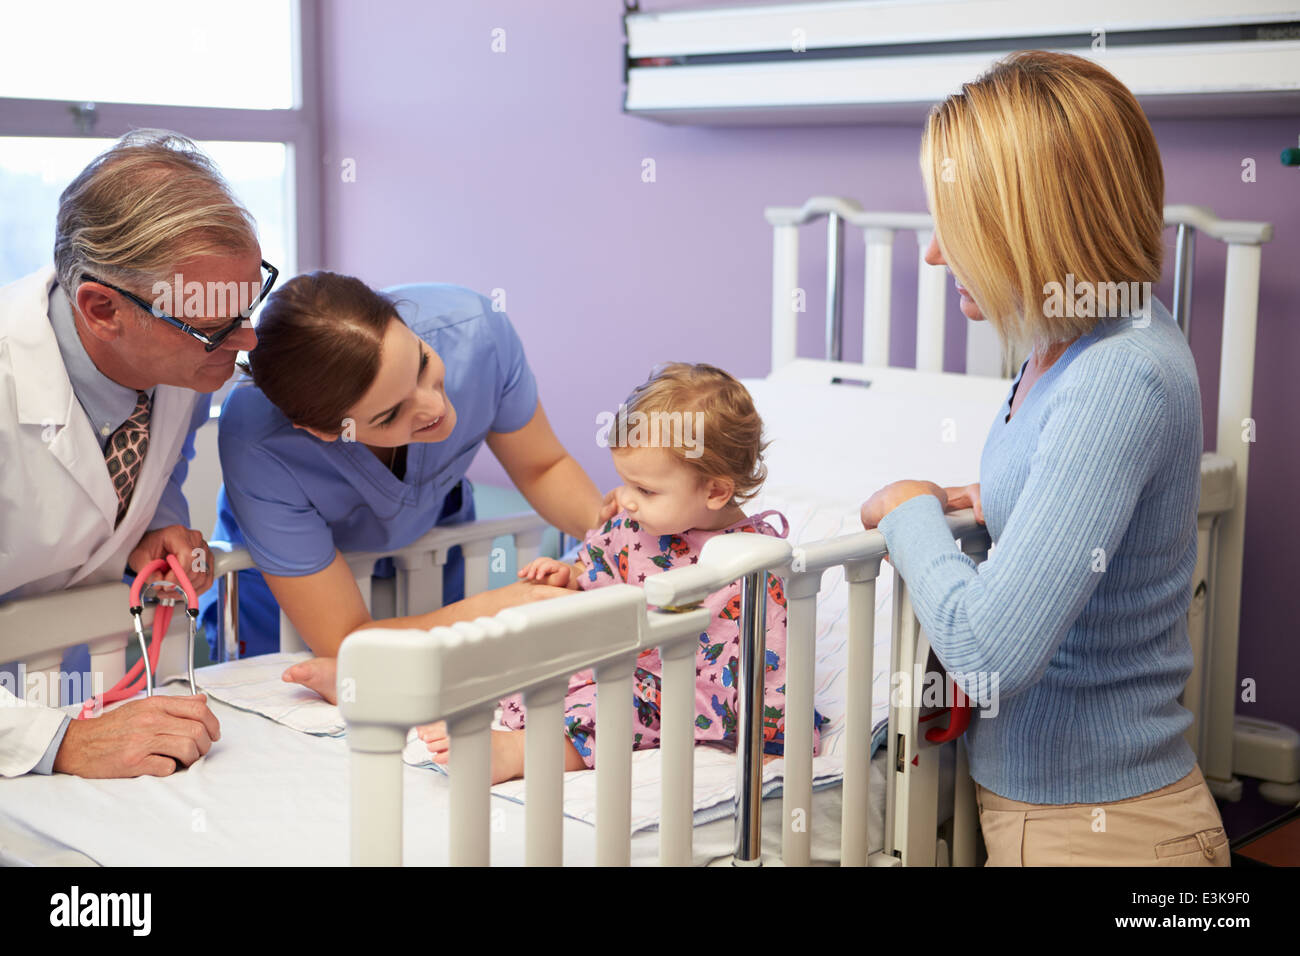 Mother And Daughter In Pediatric Ward Of Hospital Stock Photo